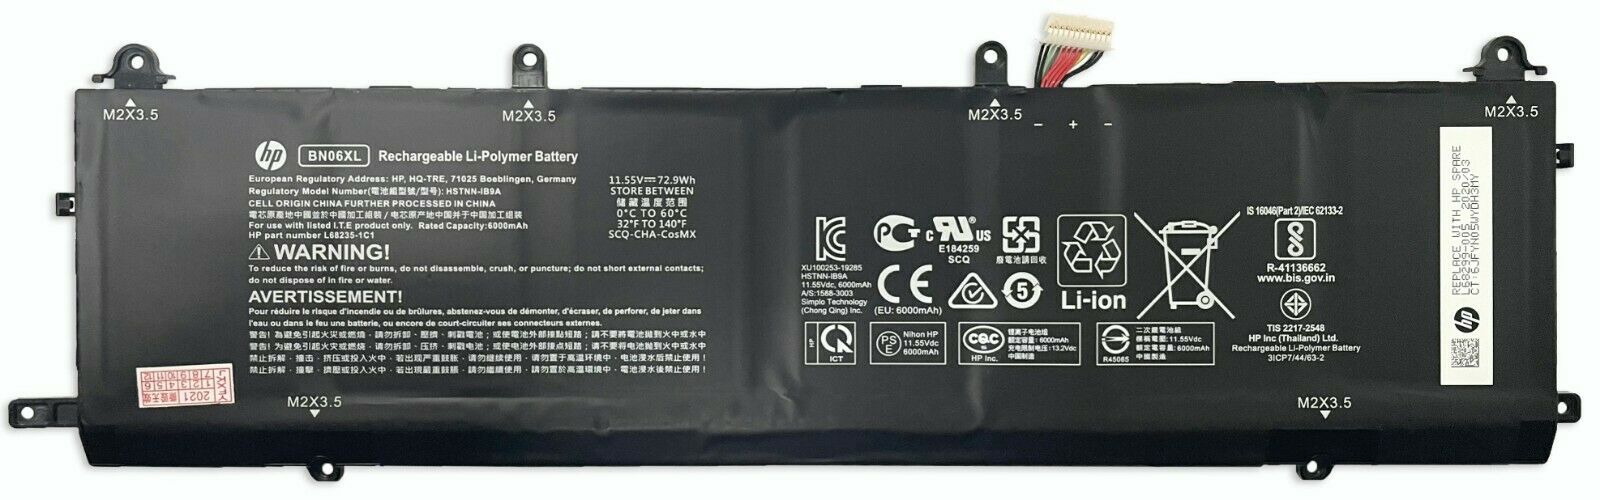 HP Spectre x360 15-eb1071ms Battery 6-cell 72.9Wh